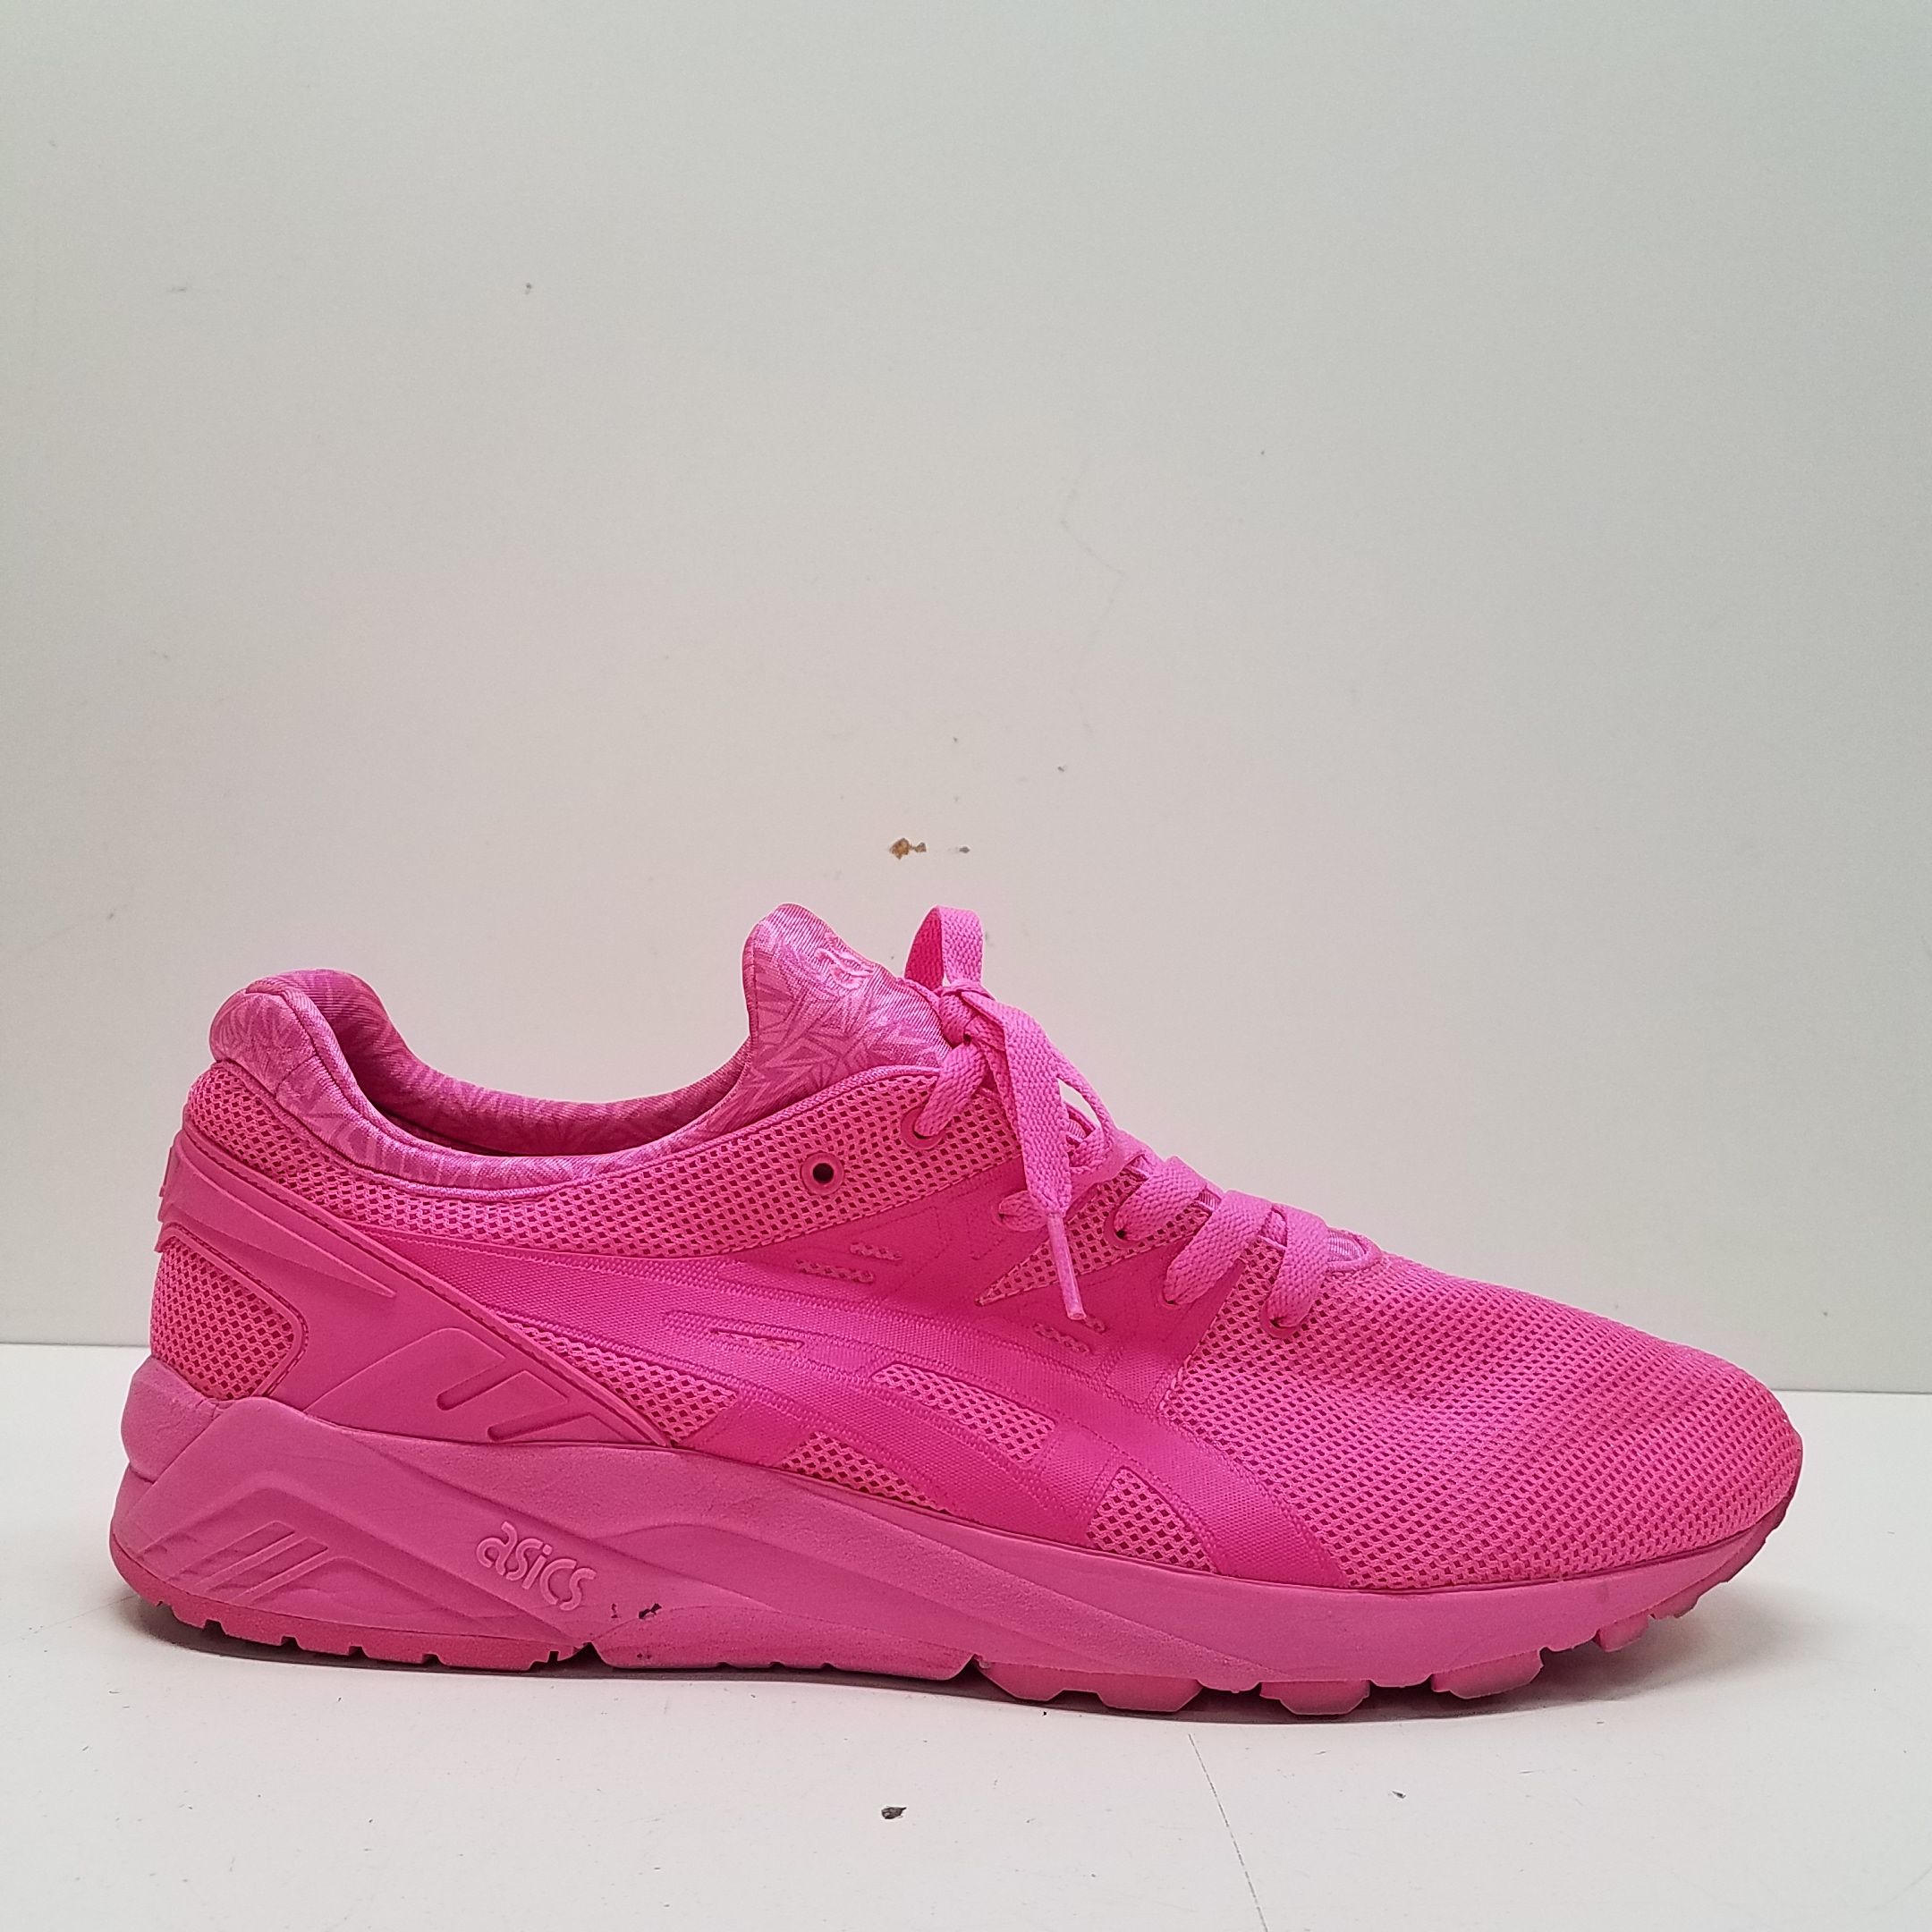 Buy the Asics Gel-Kayano Trainer Evo Neon Pink Athletic Shoes Men's ...